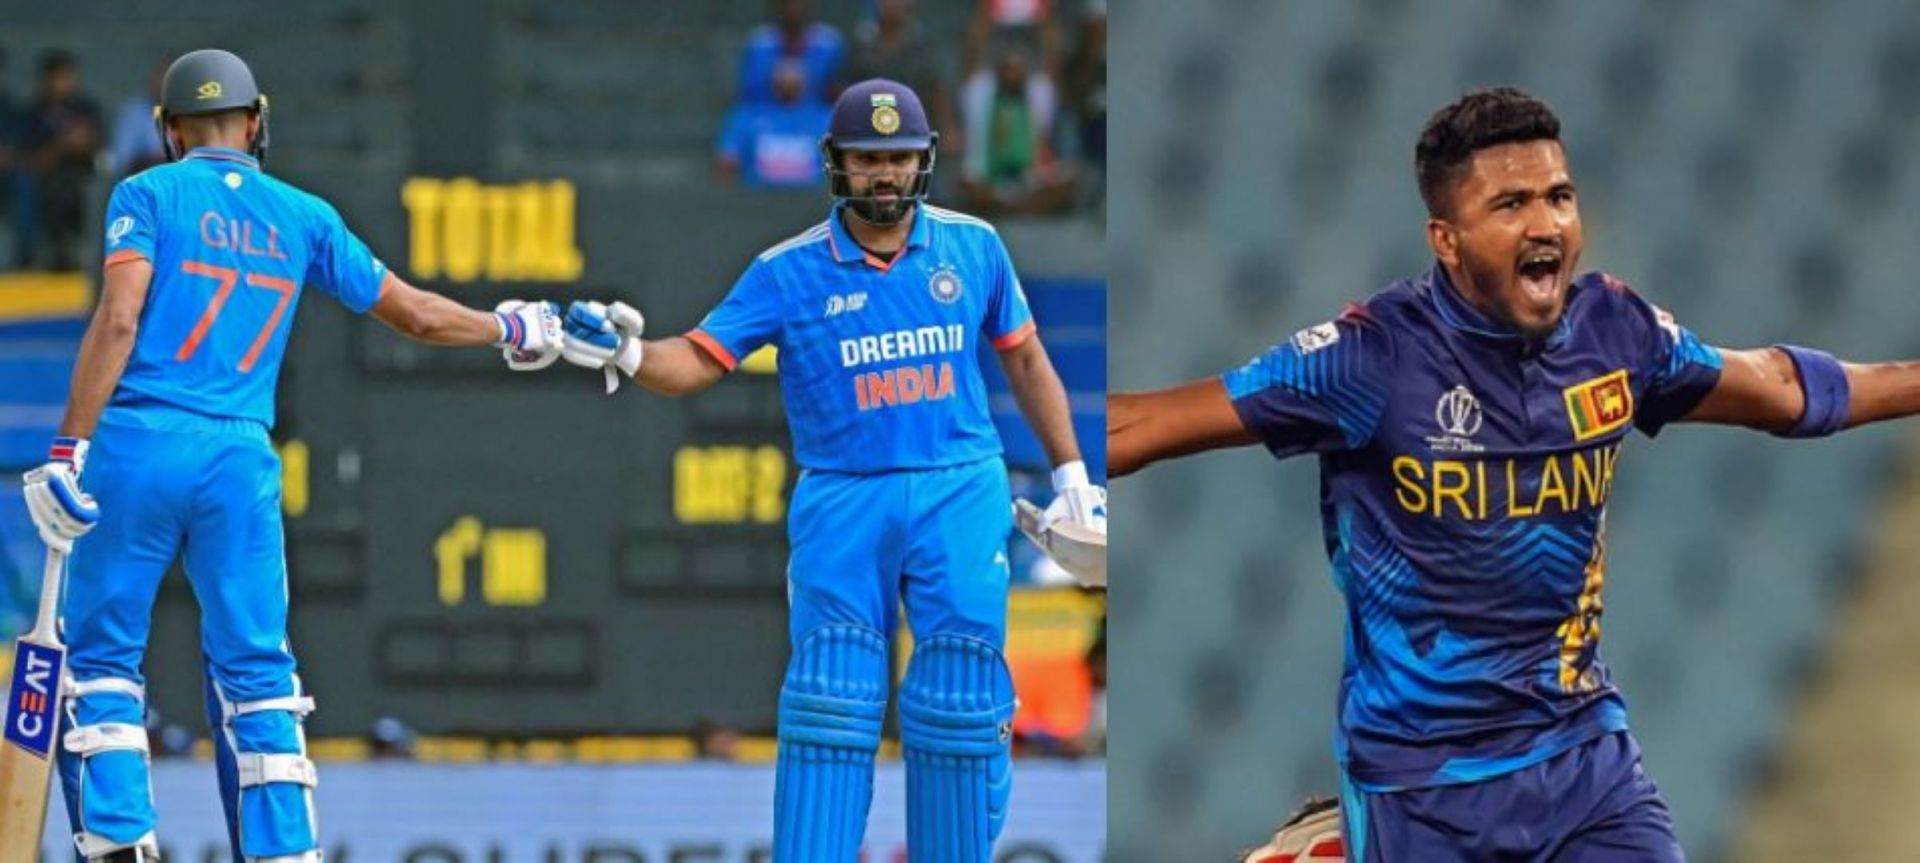 The powerplay battle is likely to determine the outcome of the India-Sri Lanka contest